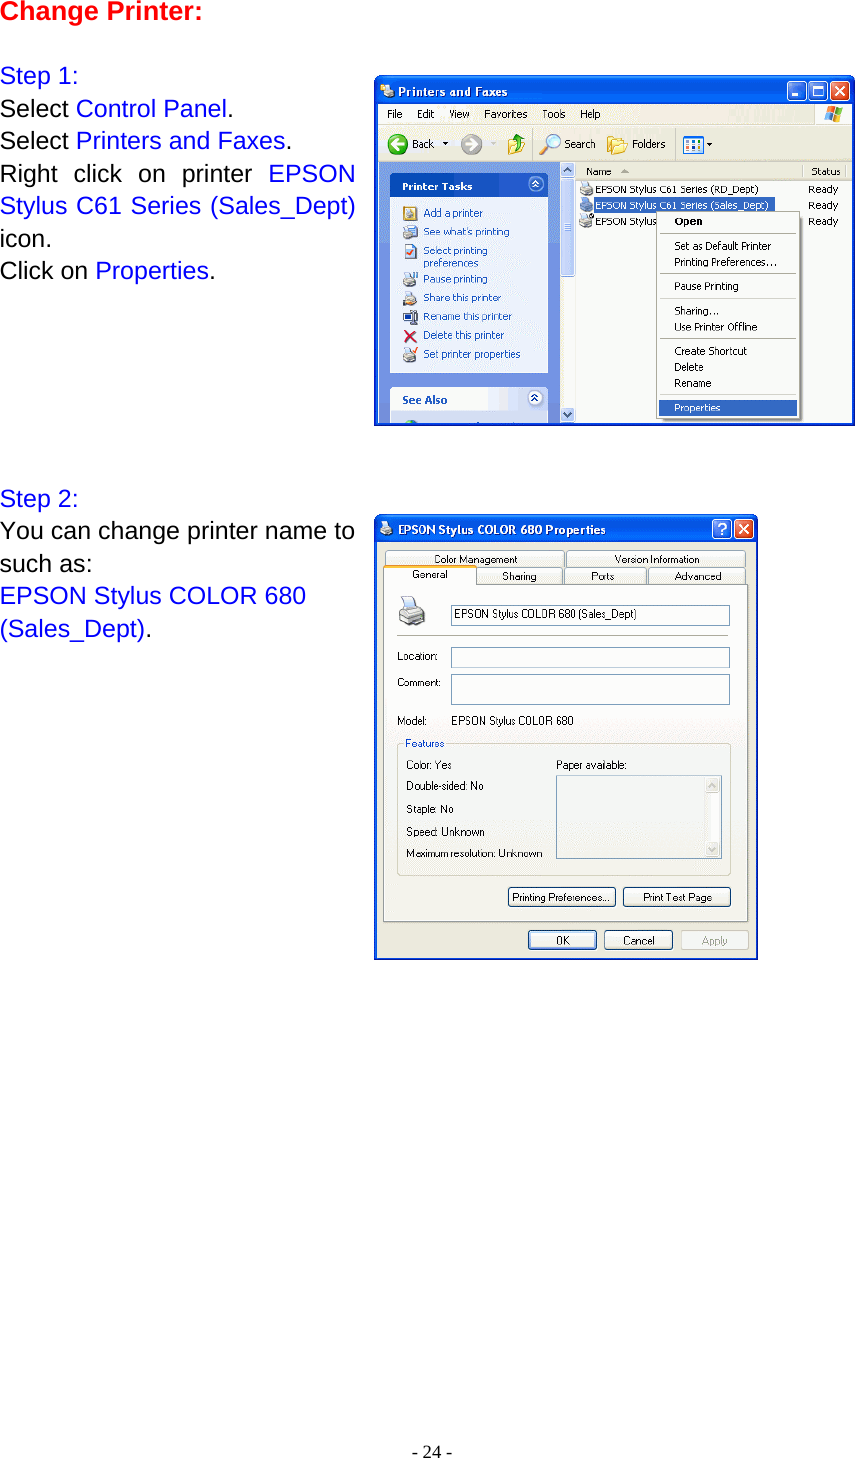  - 24 - Change Printer:  Step 1: Select Control Panel. Select Printers and Faxes. Right click on printer EPSON Stylus C61 Series (Sales_Dept) icon. Click on Properties.       Step 2: You can change printer name to such as: EPSON Stylus COLOR 680 (Sales_Dept).                        